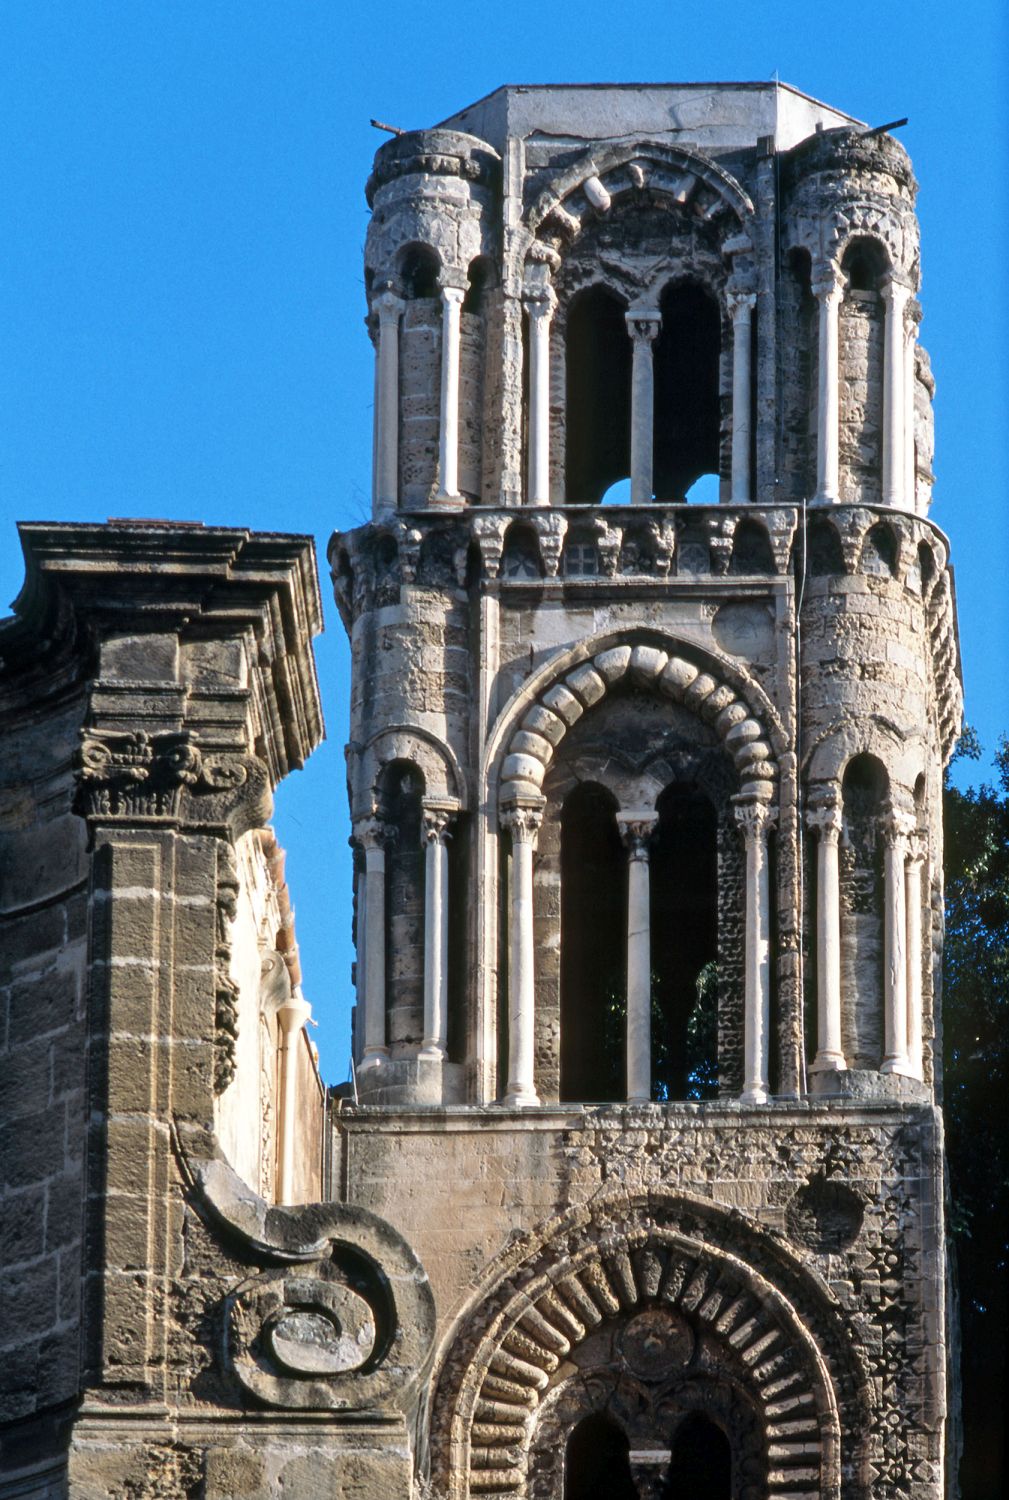 Exterior view of bell tower.